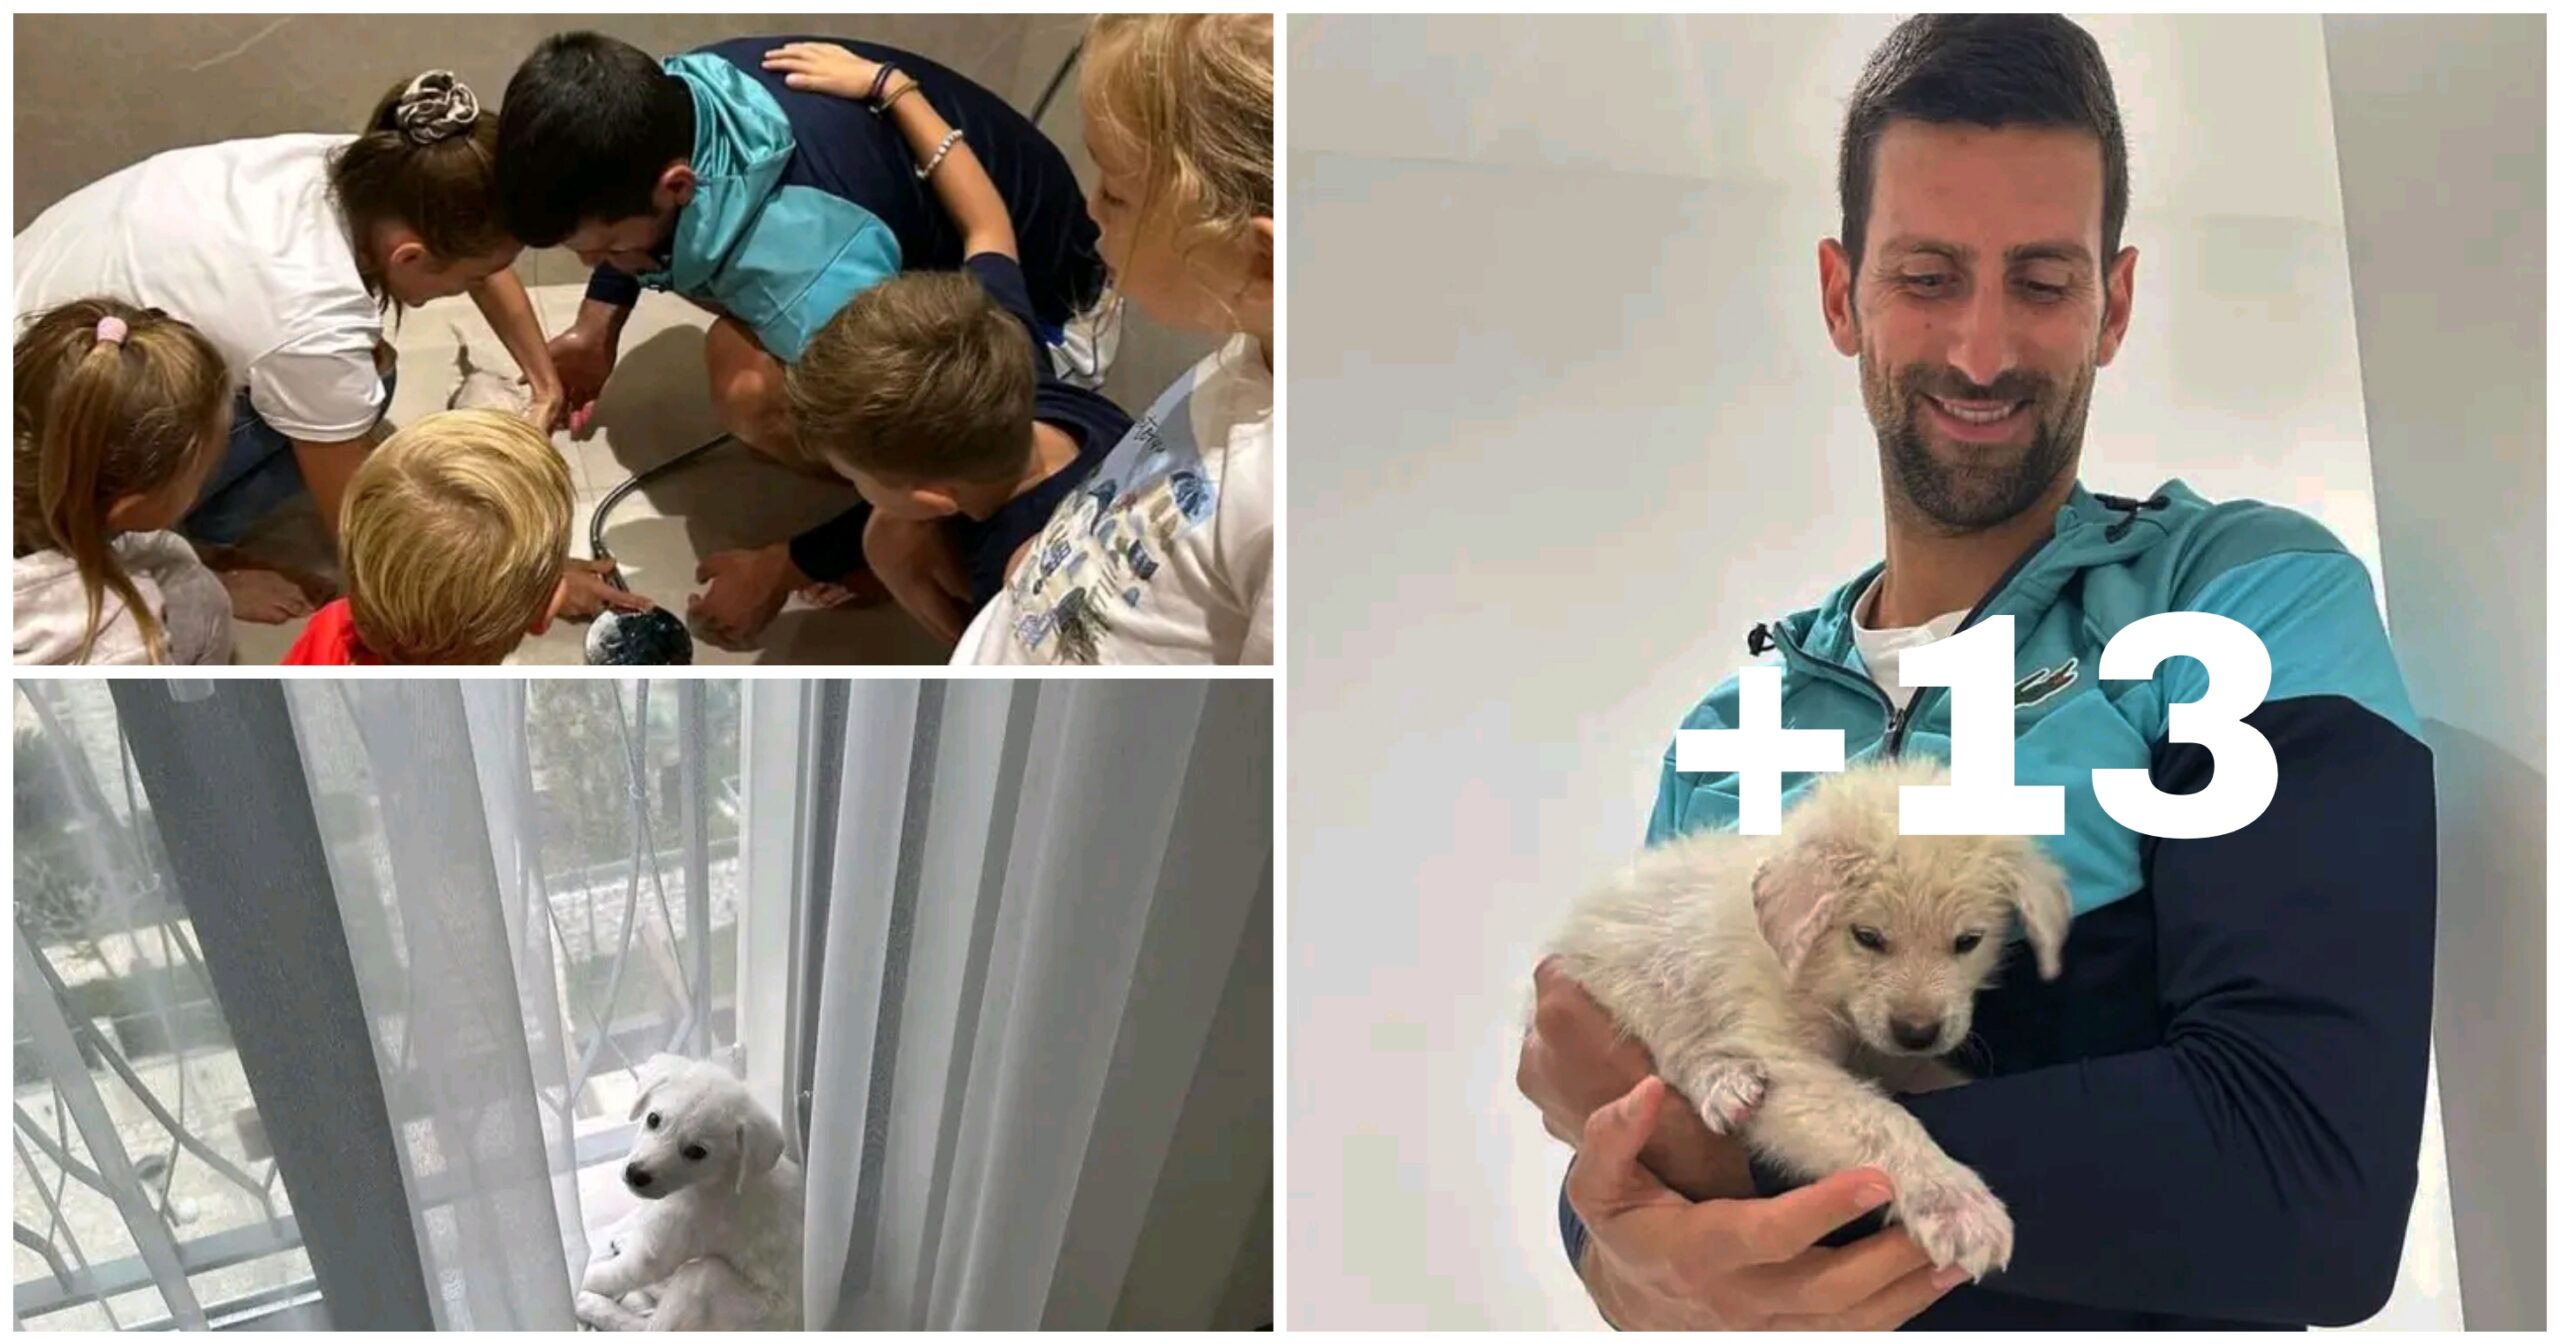 About Novak Djokovic And His Children Love For His Dog Pet [PHOTOS].